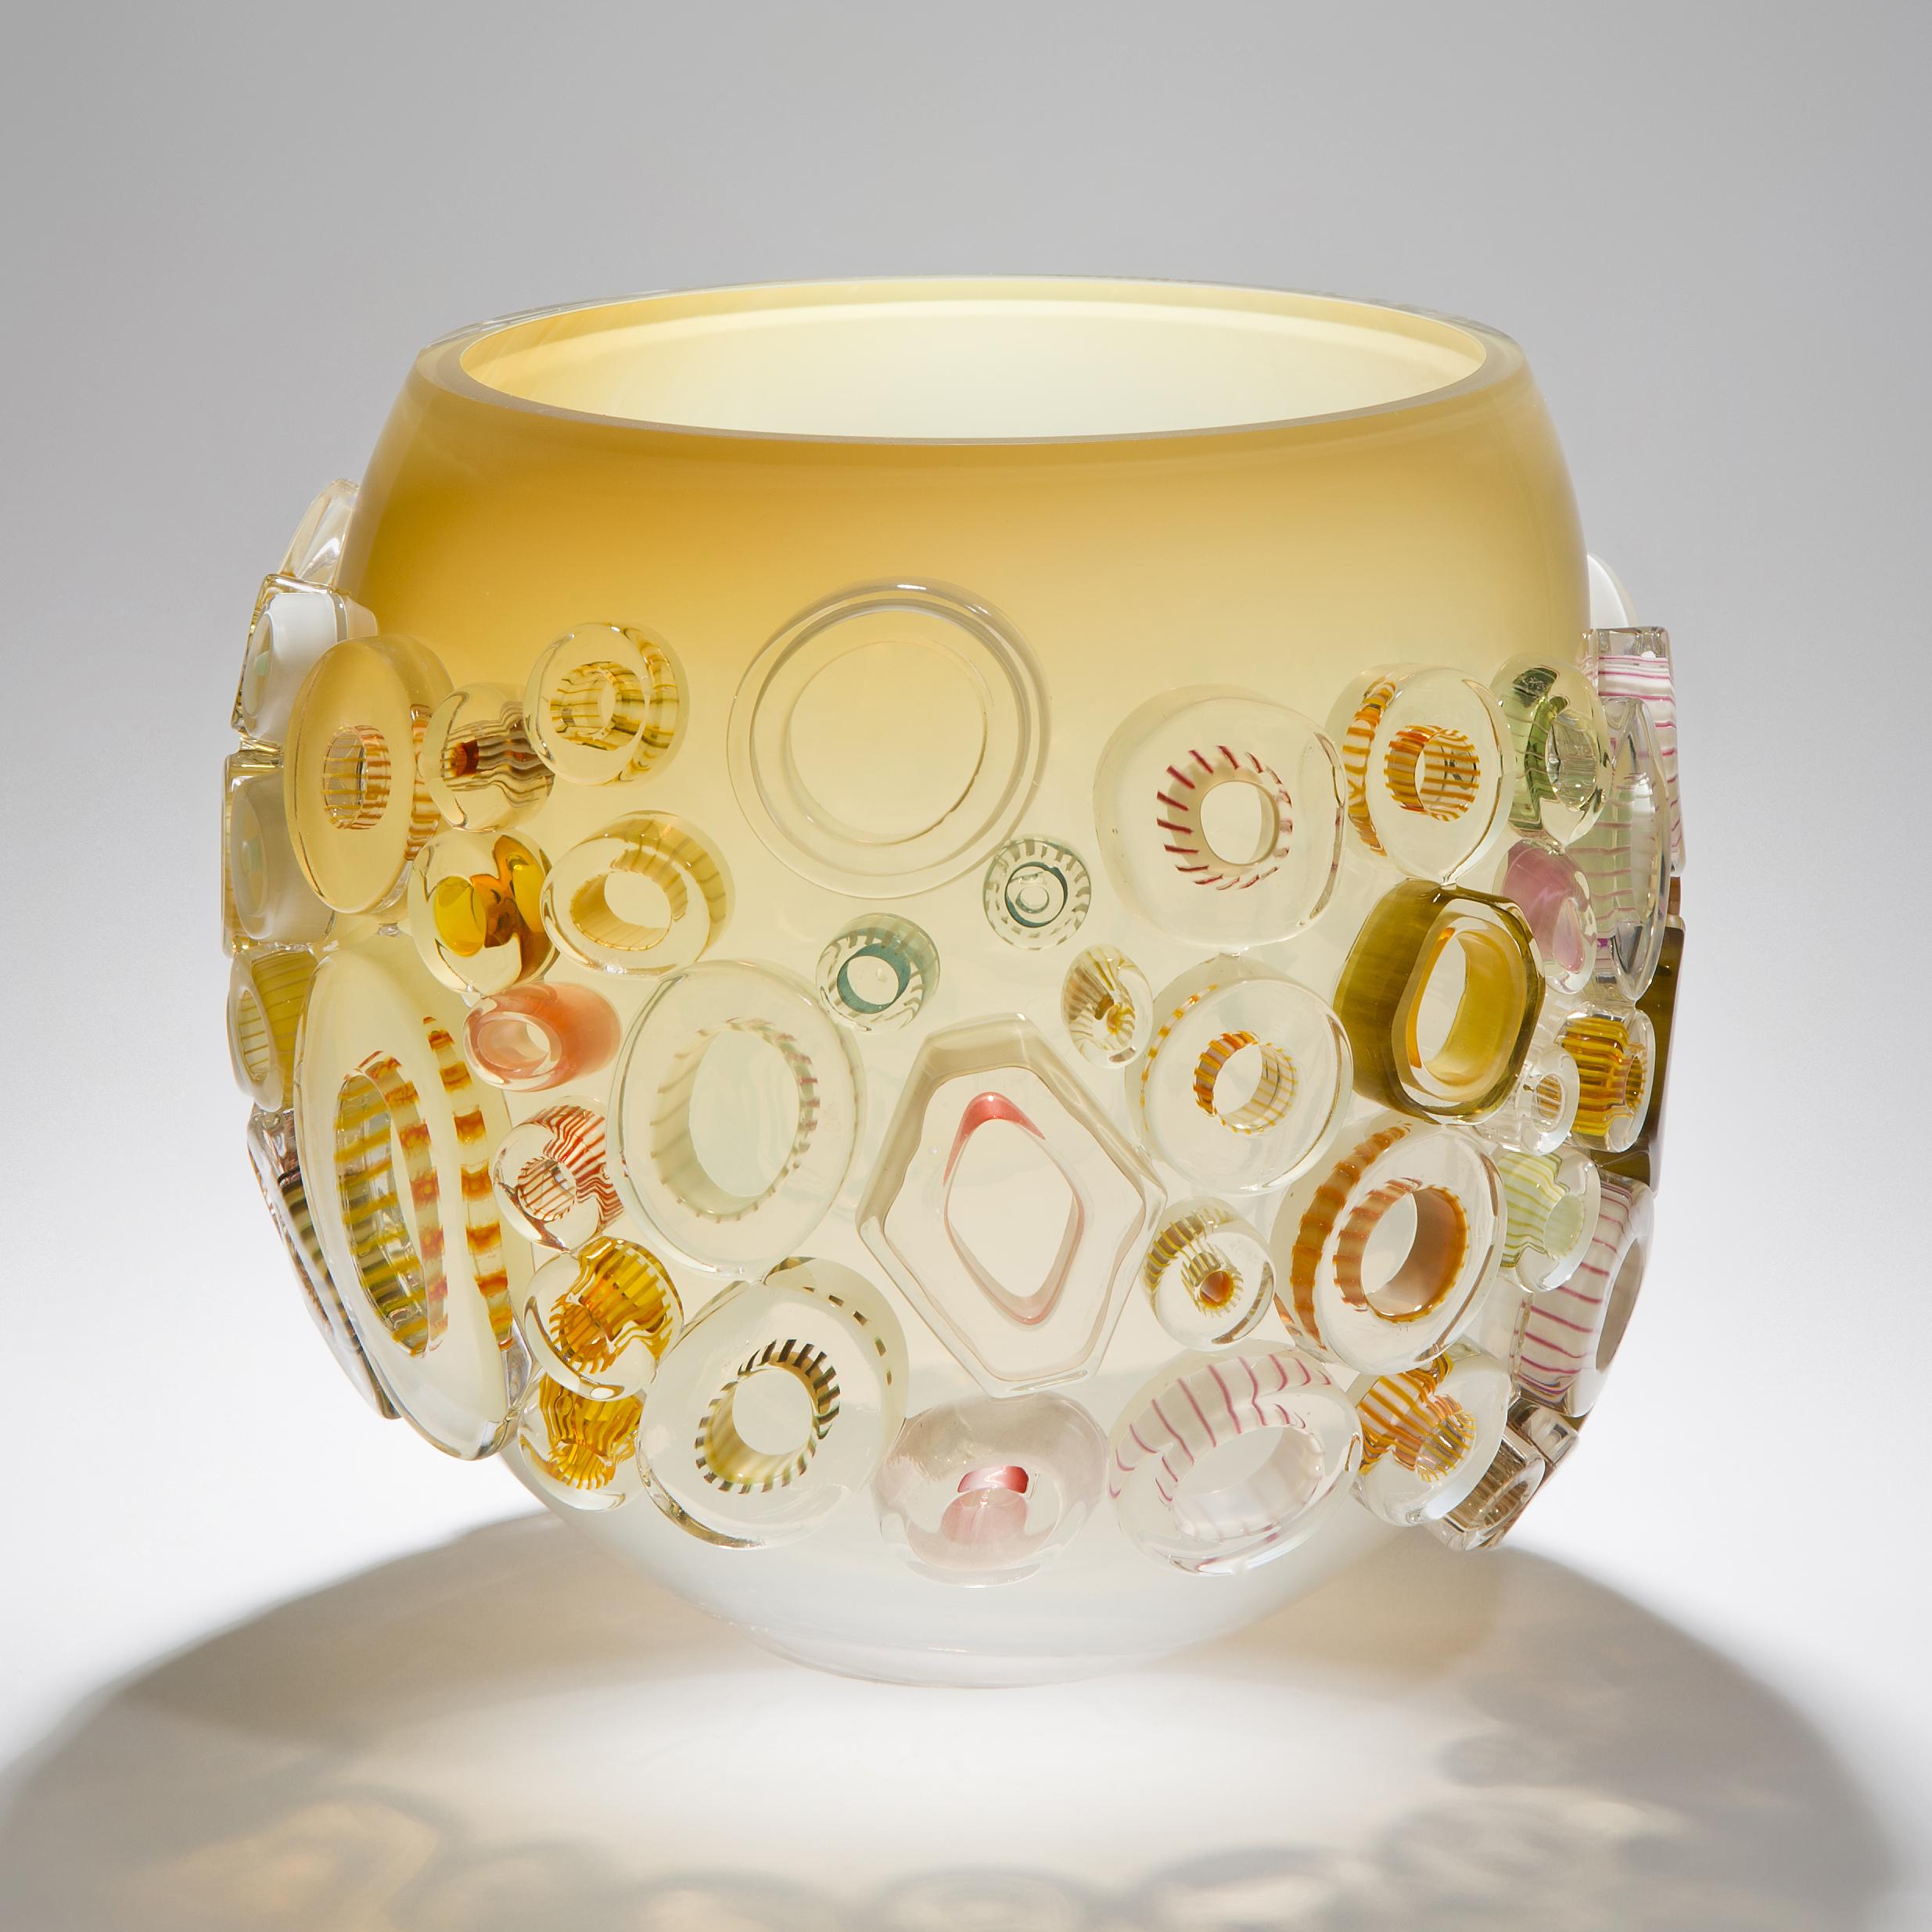 Common Ray Honey Caramel is a unique handblown and crafted vase & artwork / bowl / centrepiece by the German artist, Sabine Lintzen. The initial inner form is free-blown and adorned with various individually shaped murrini, all created in a mix of